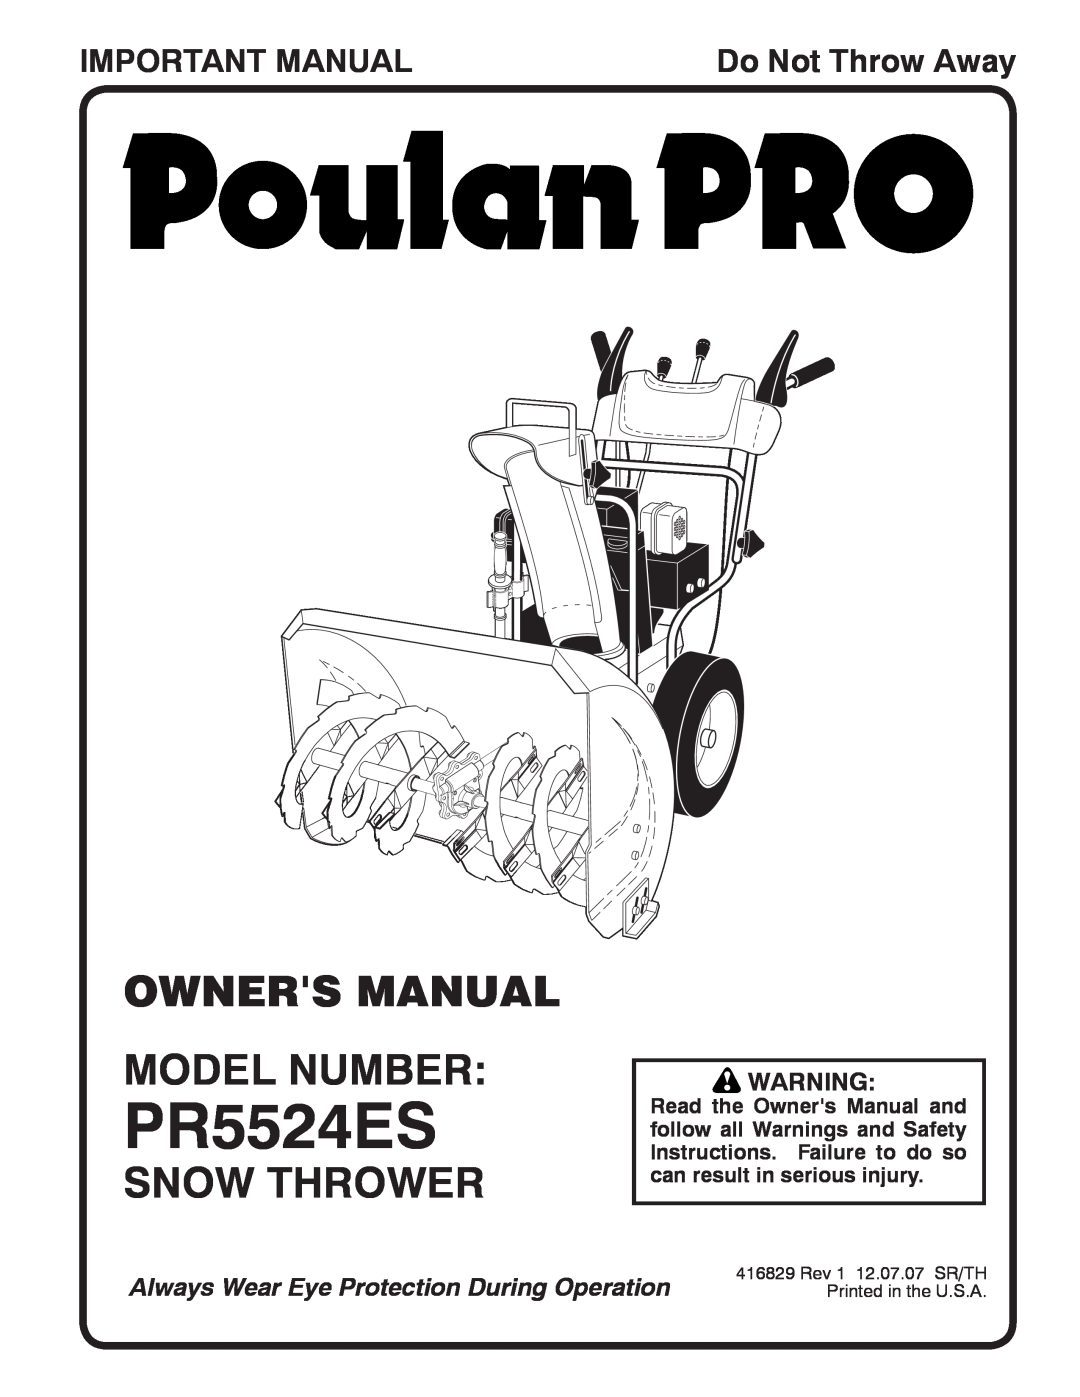 Poulan PR5524ES owner manual Owners Manual Model Number, Snow Thrower, Important Manual, Do Not Throw Away 